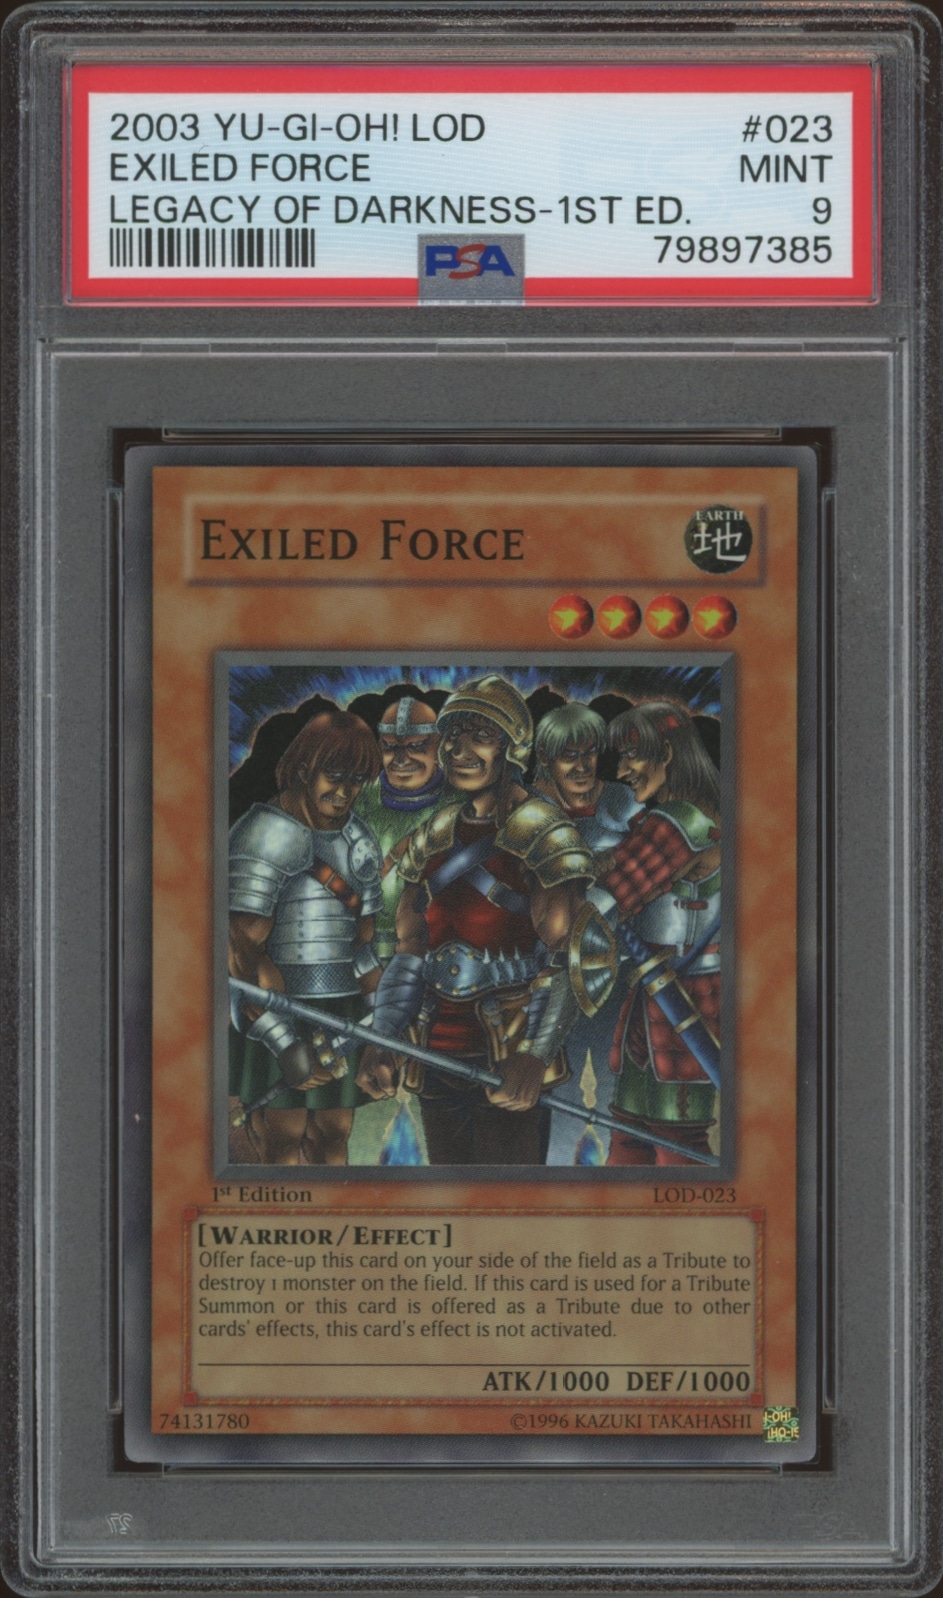 PSA 9 graded 2003 Yu-Gi-Oh! Exiled Force card from Legacy of Darkness series.